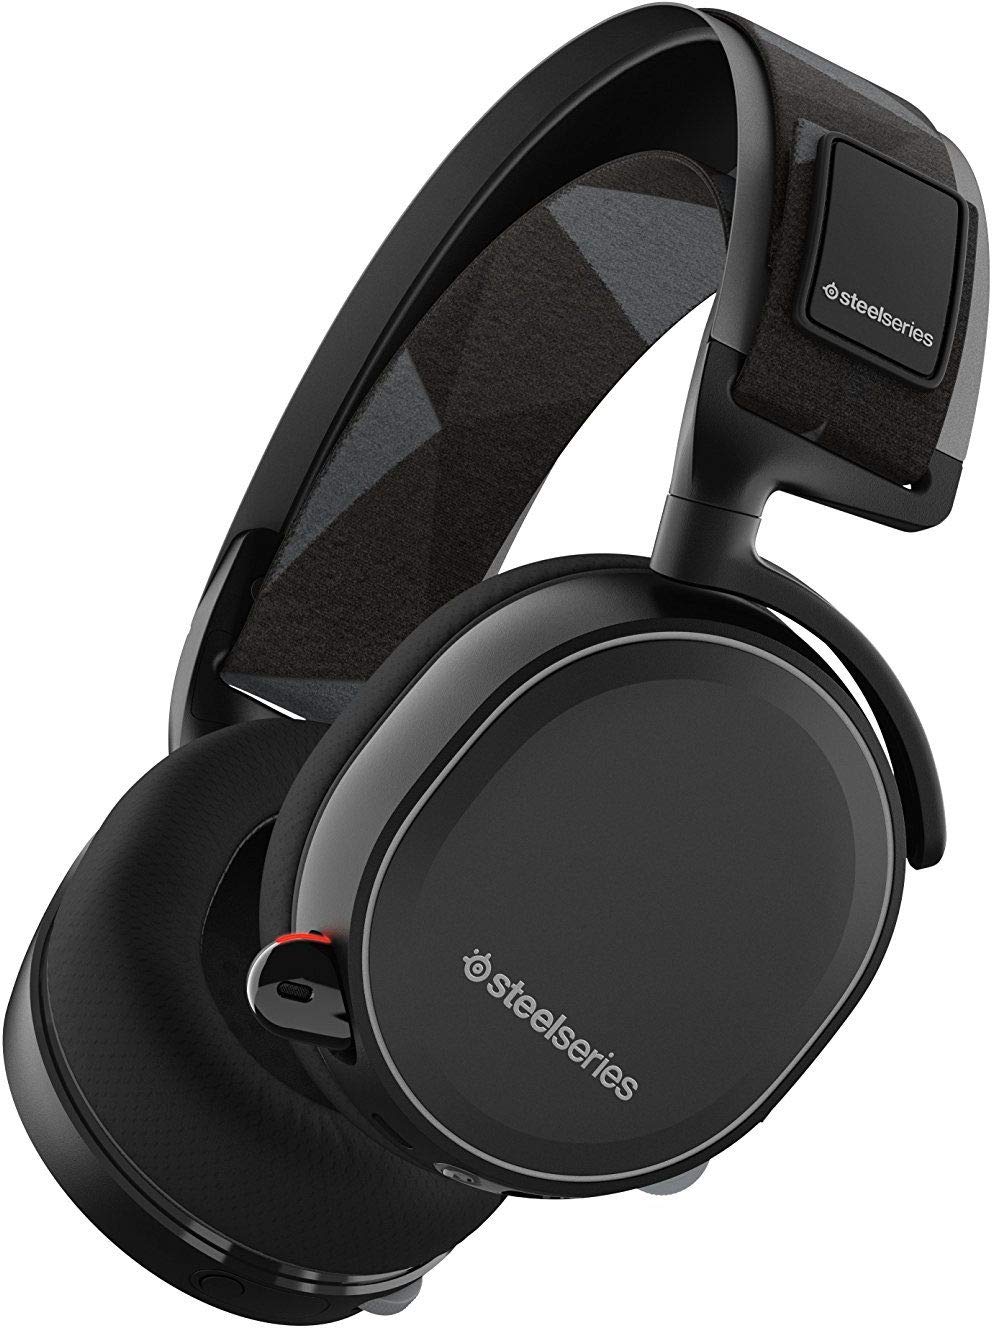 SteelSeries Arctis 7 Lag-Free Wireless Gaming Headset - Black (Discontinued by Manufacturer)